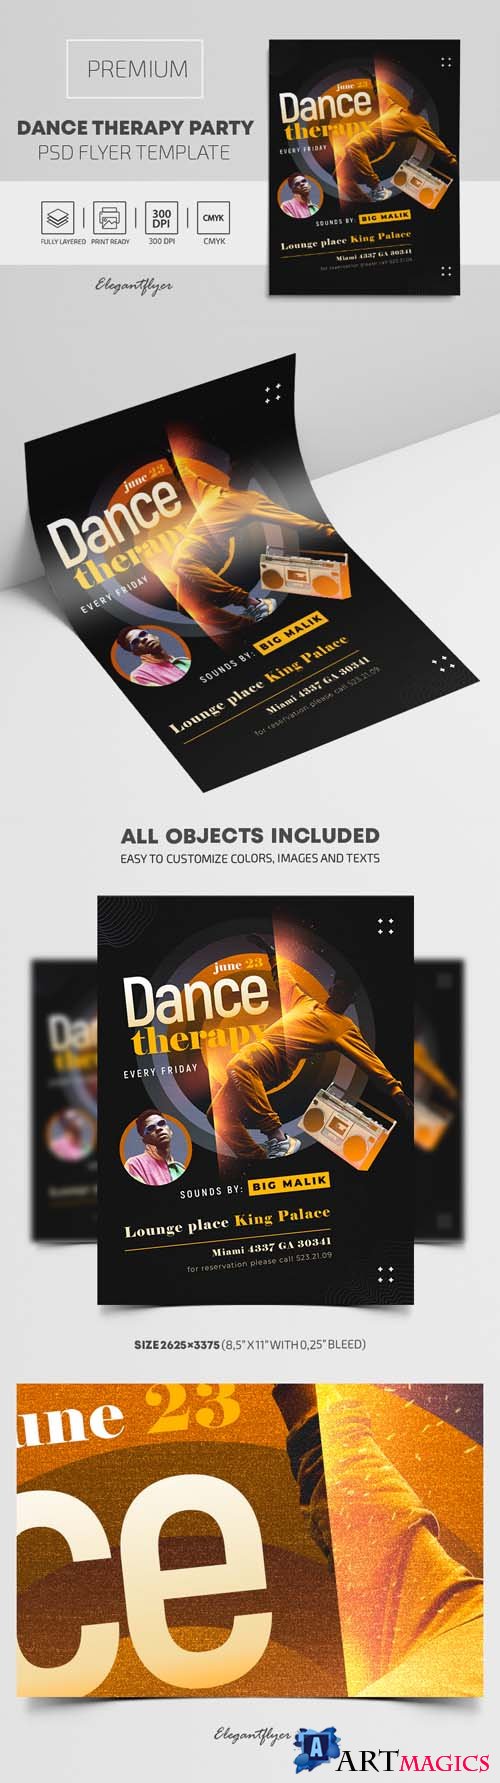 Dance Therapy Party Premium PSD Flyer Template